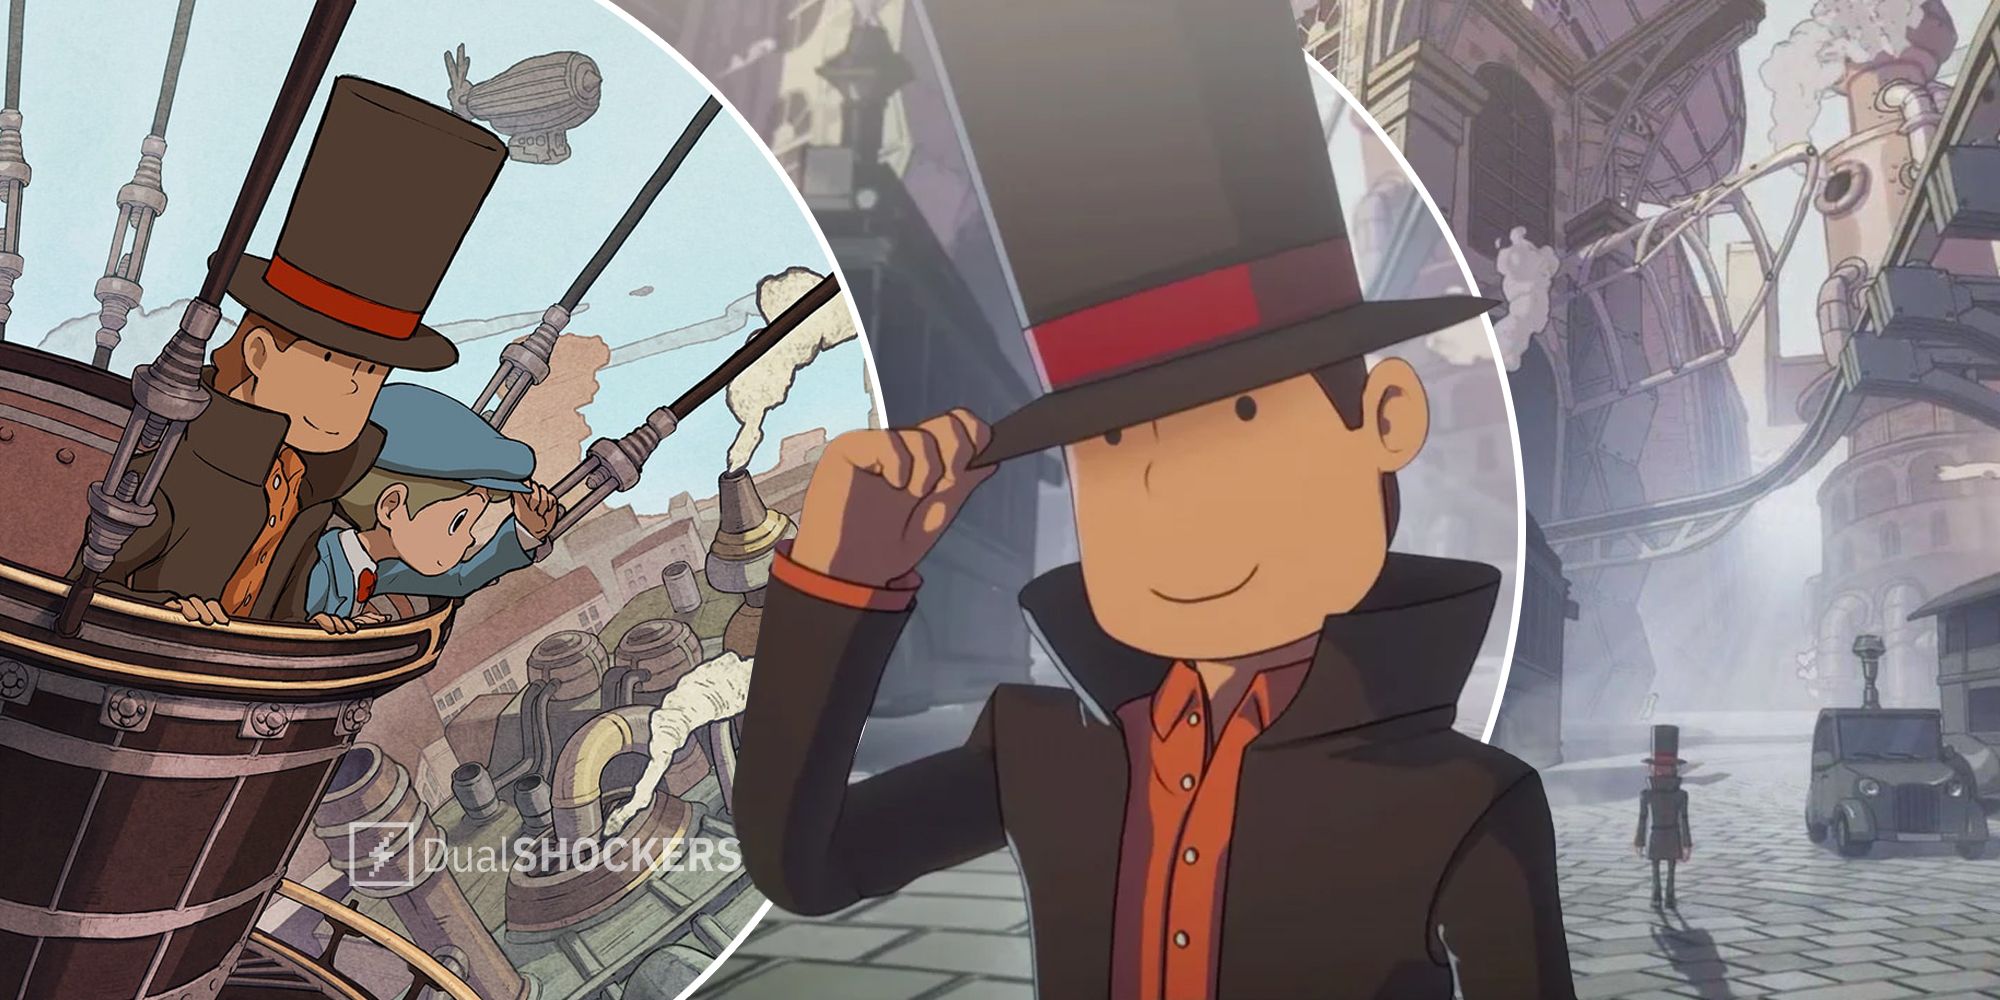 A New Professor Layton Game Is Coming to Nintendo Switch - IGN